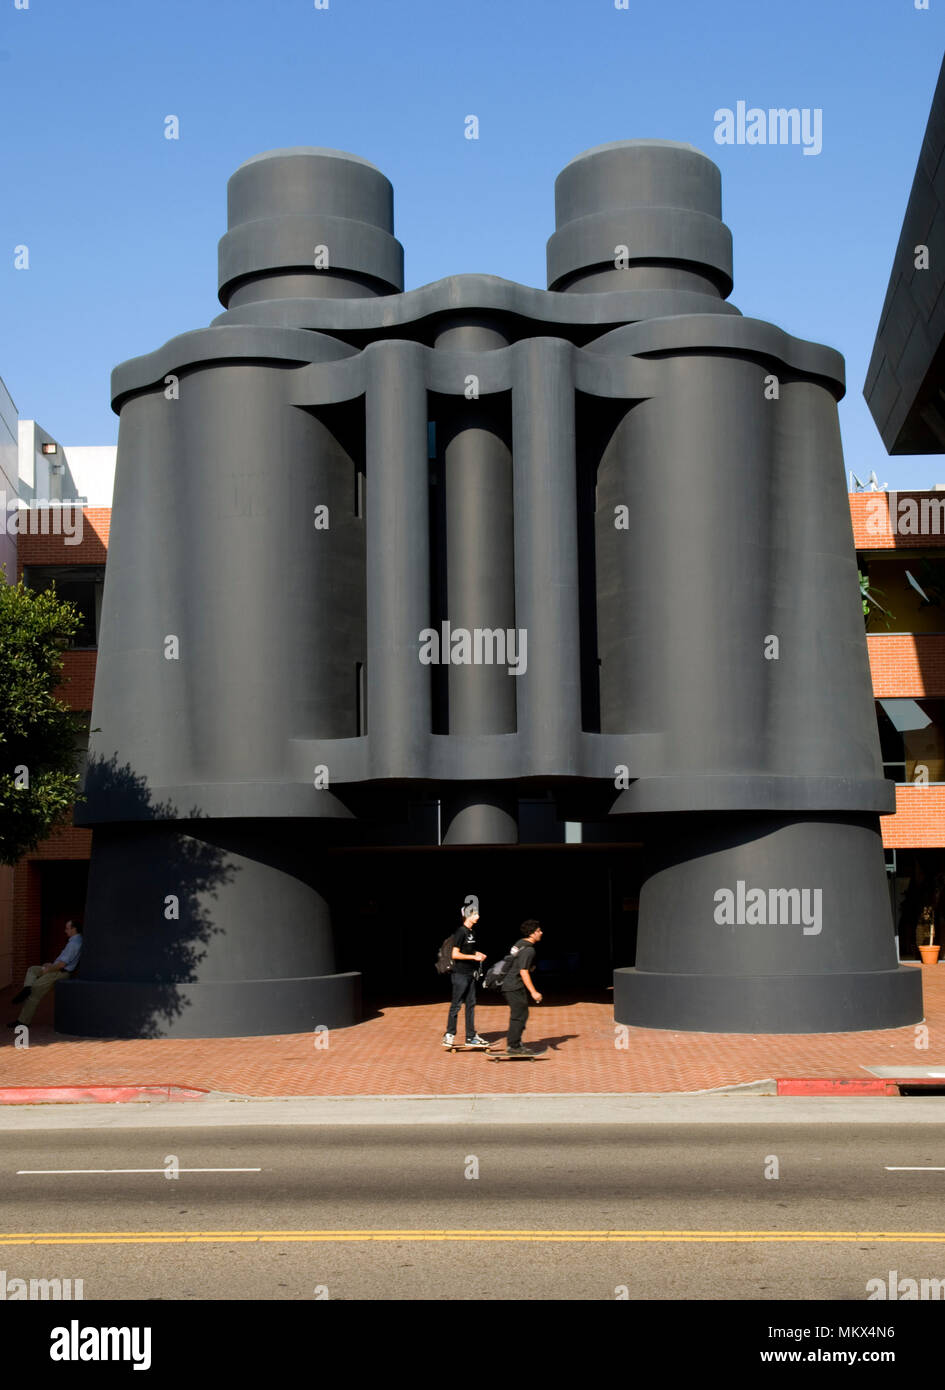 Giant binoculars in front of building designed by architect Frank Gehry in Venice Beach, California Stock Photo